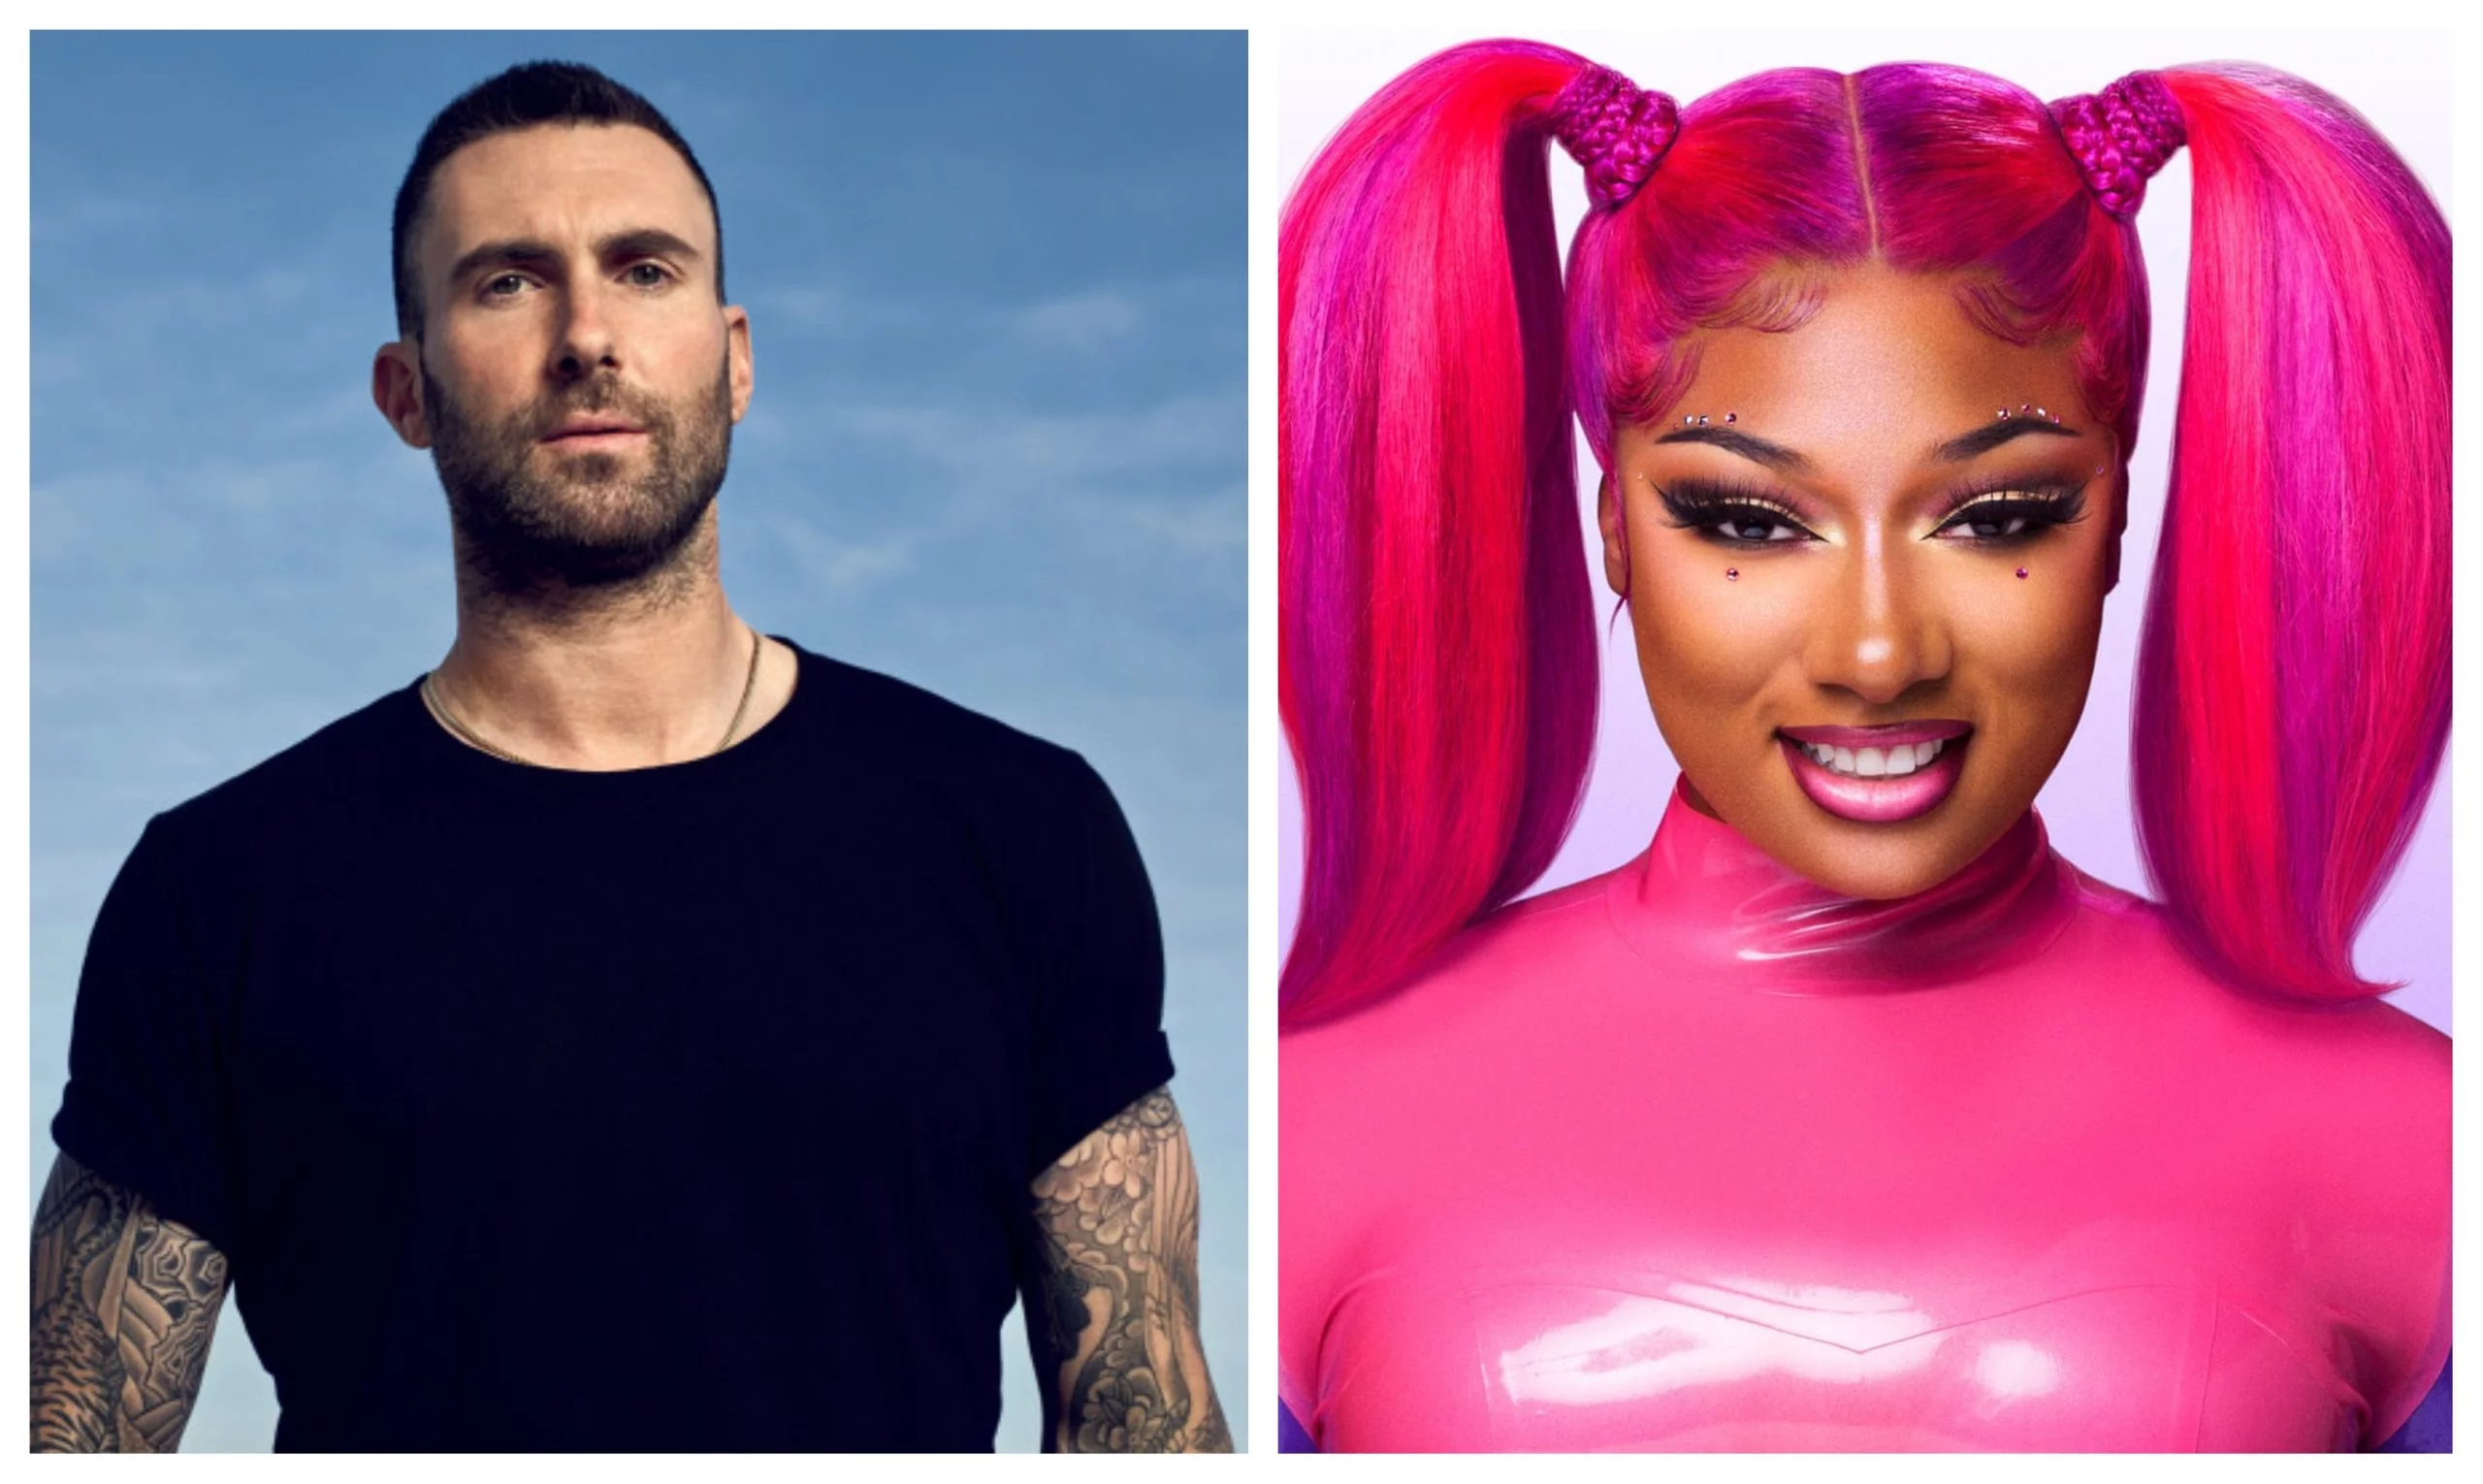 Maroon 5 Release New Song 'Beautiful Mistakes' With Megan Thee Stallion –  Read the Lyrics!, Adam Levine, Maroon 5, Music